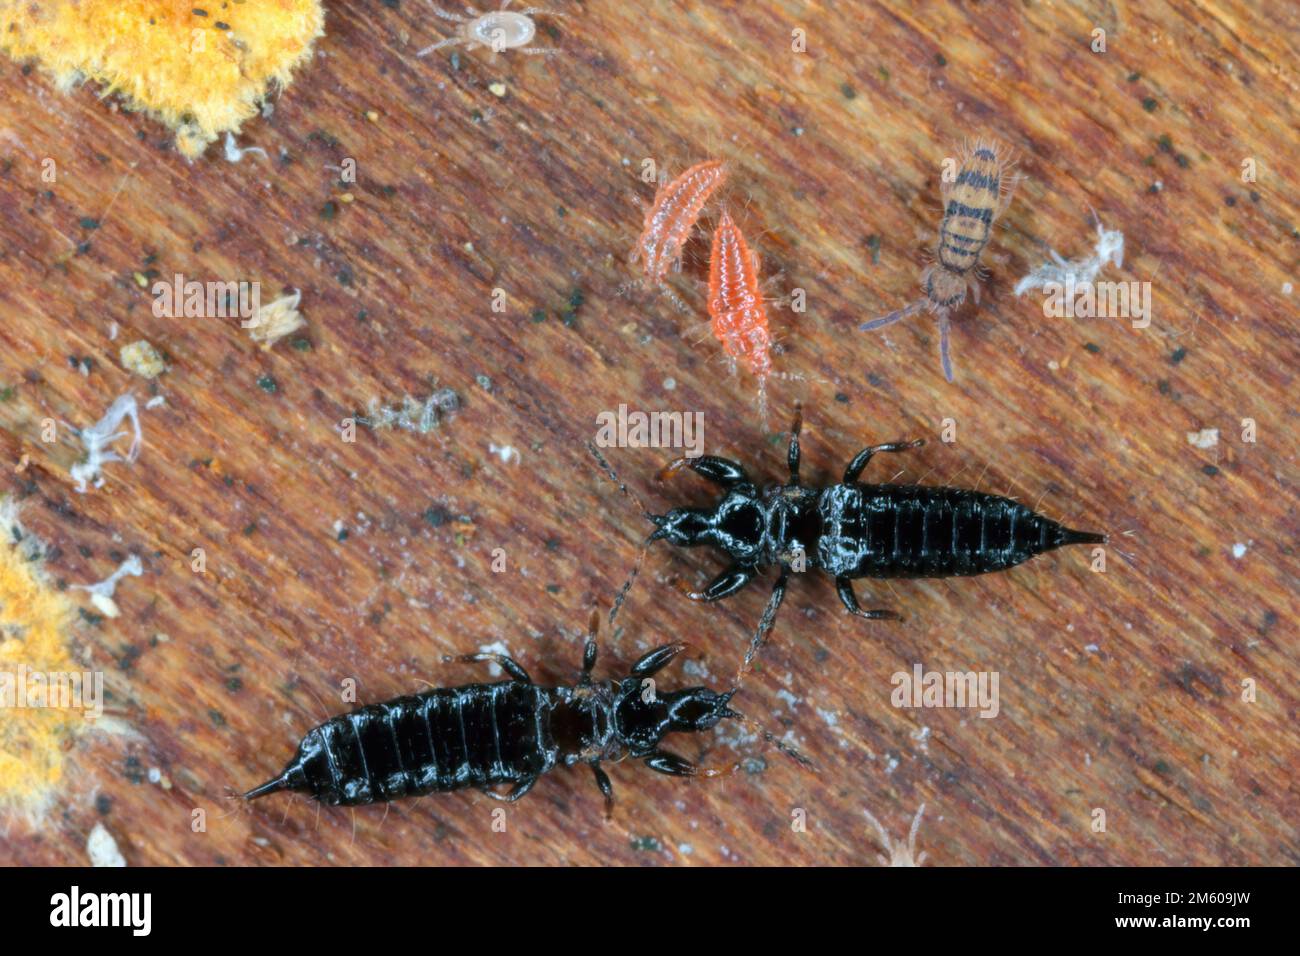 Springtails and thrips, black adults and red nymphs feeding on the mycelium under the bark of a dead tree. Stock Photo